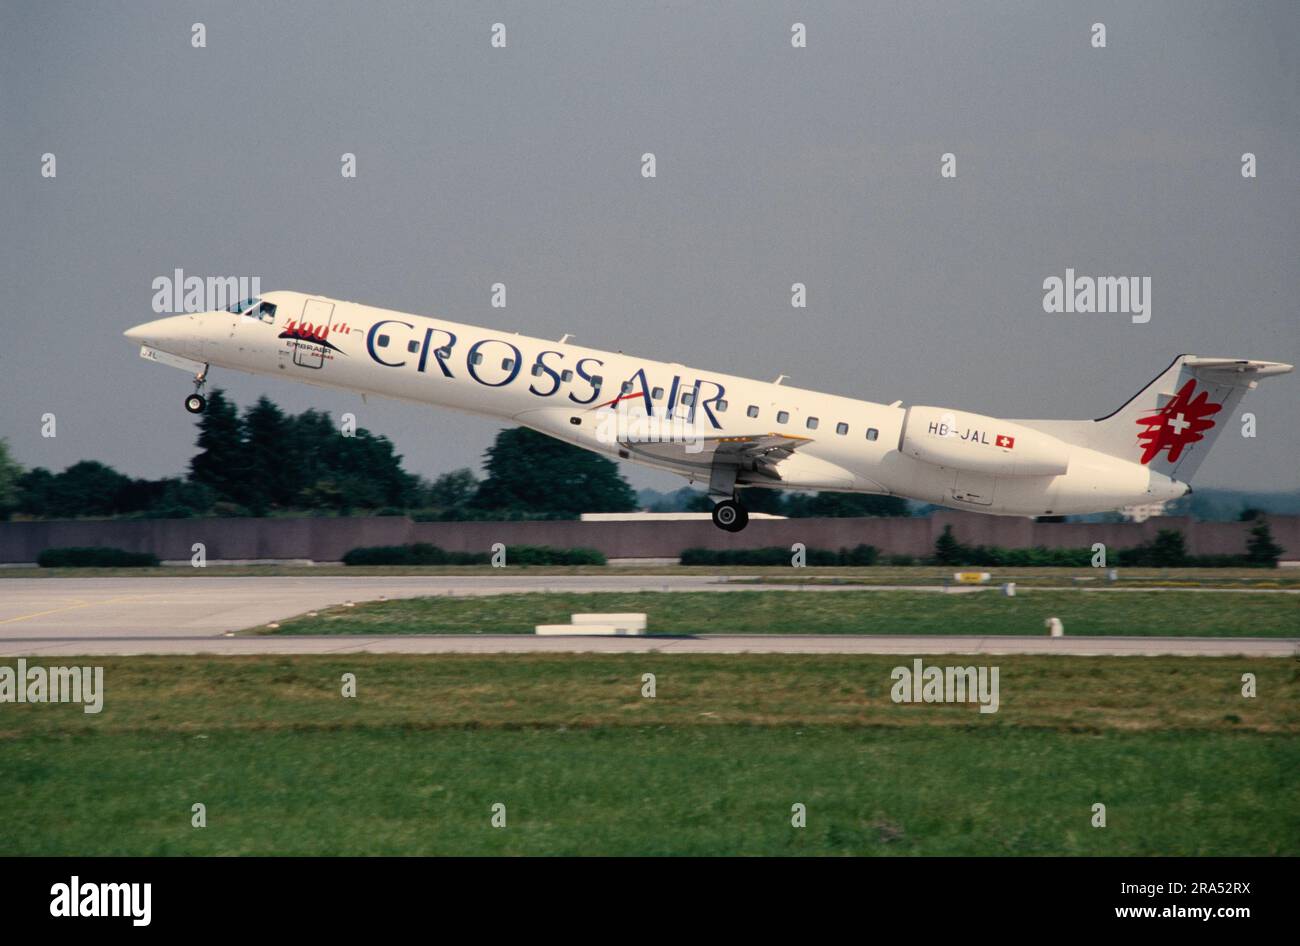 An Embraer ERJ-145 airliner belonging to Crossair of Switzerland, taking off from an airport in 2001. Registration HB-JAL. Stock Photo